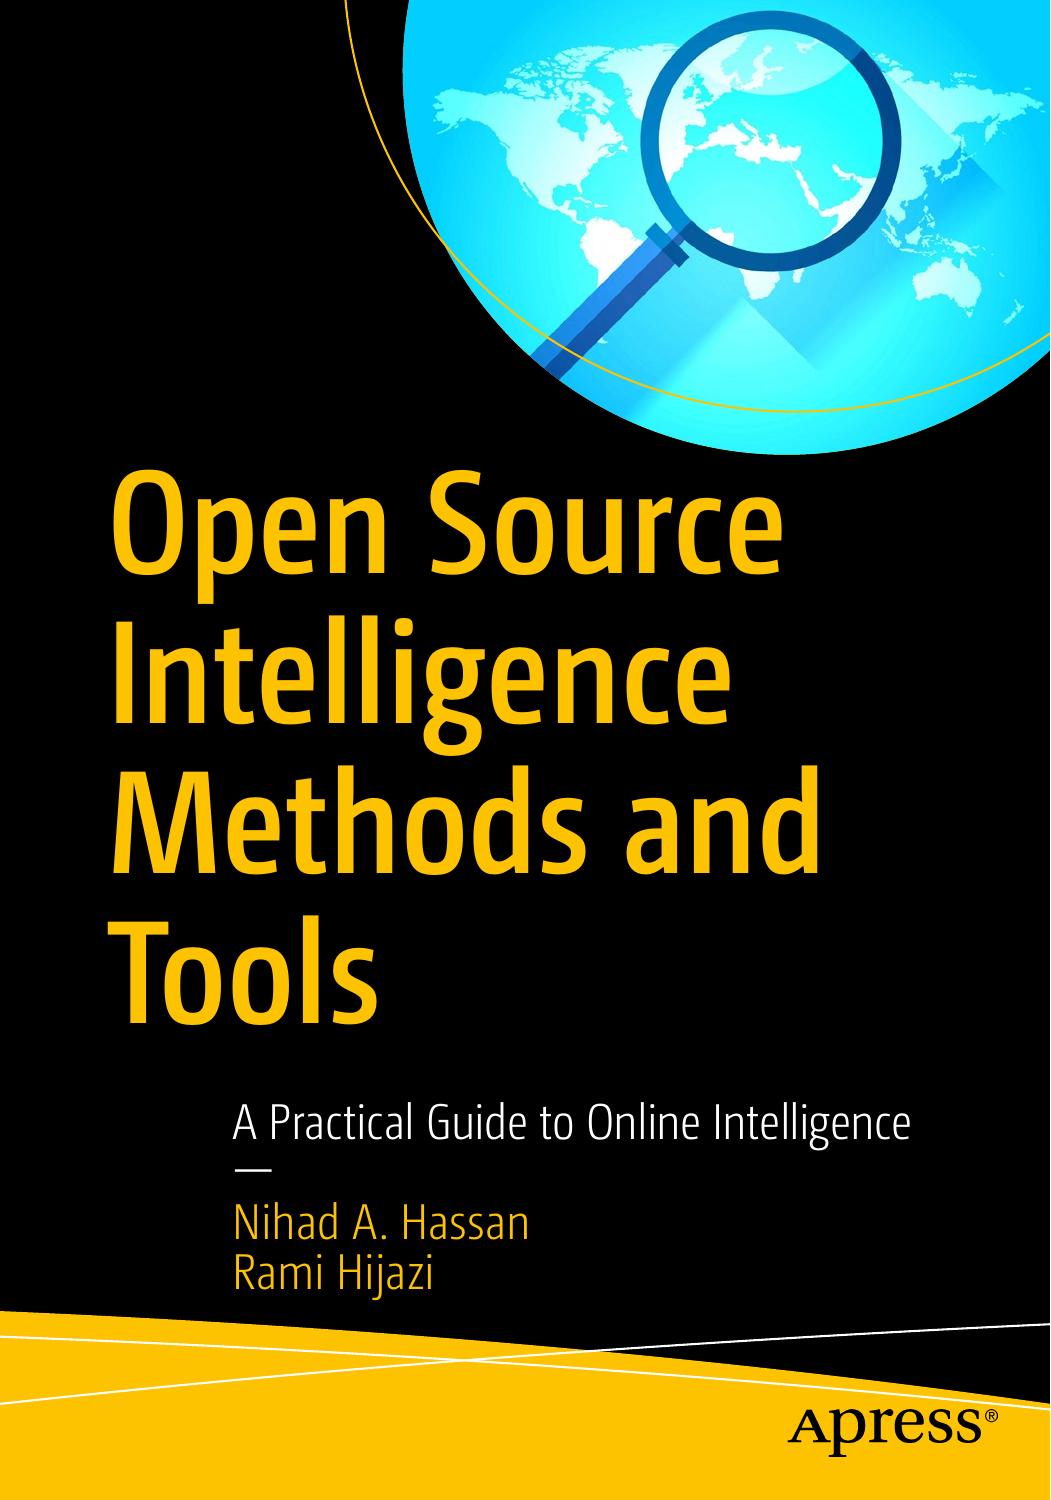 Open Source Intelligence Methods and Tools A Practical Guide to Online Intelligence 2018